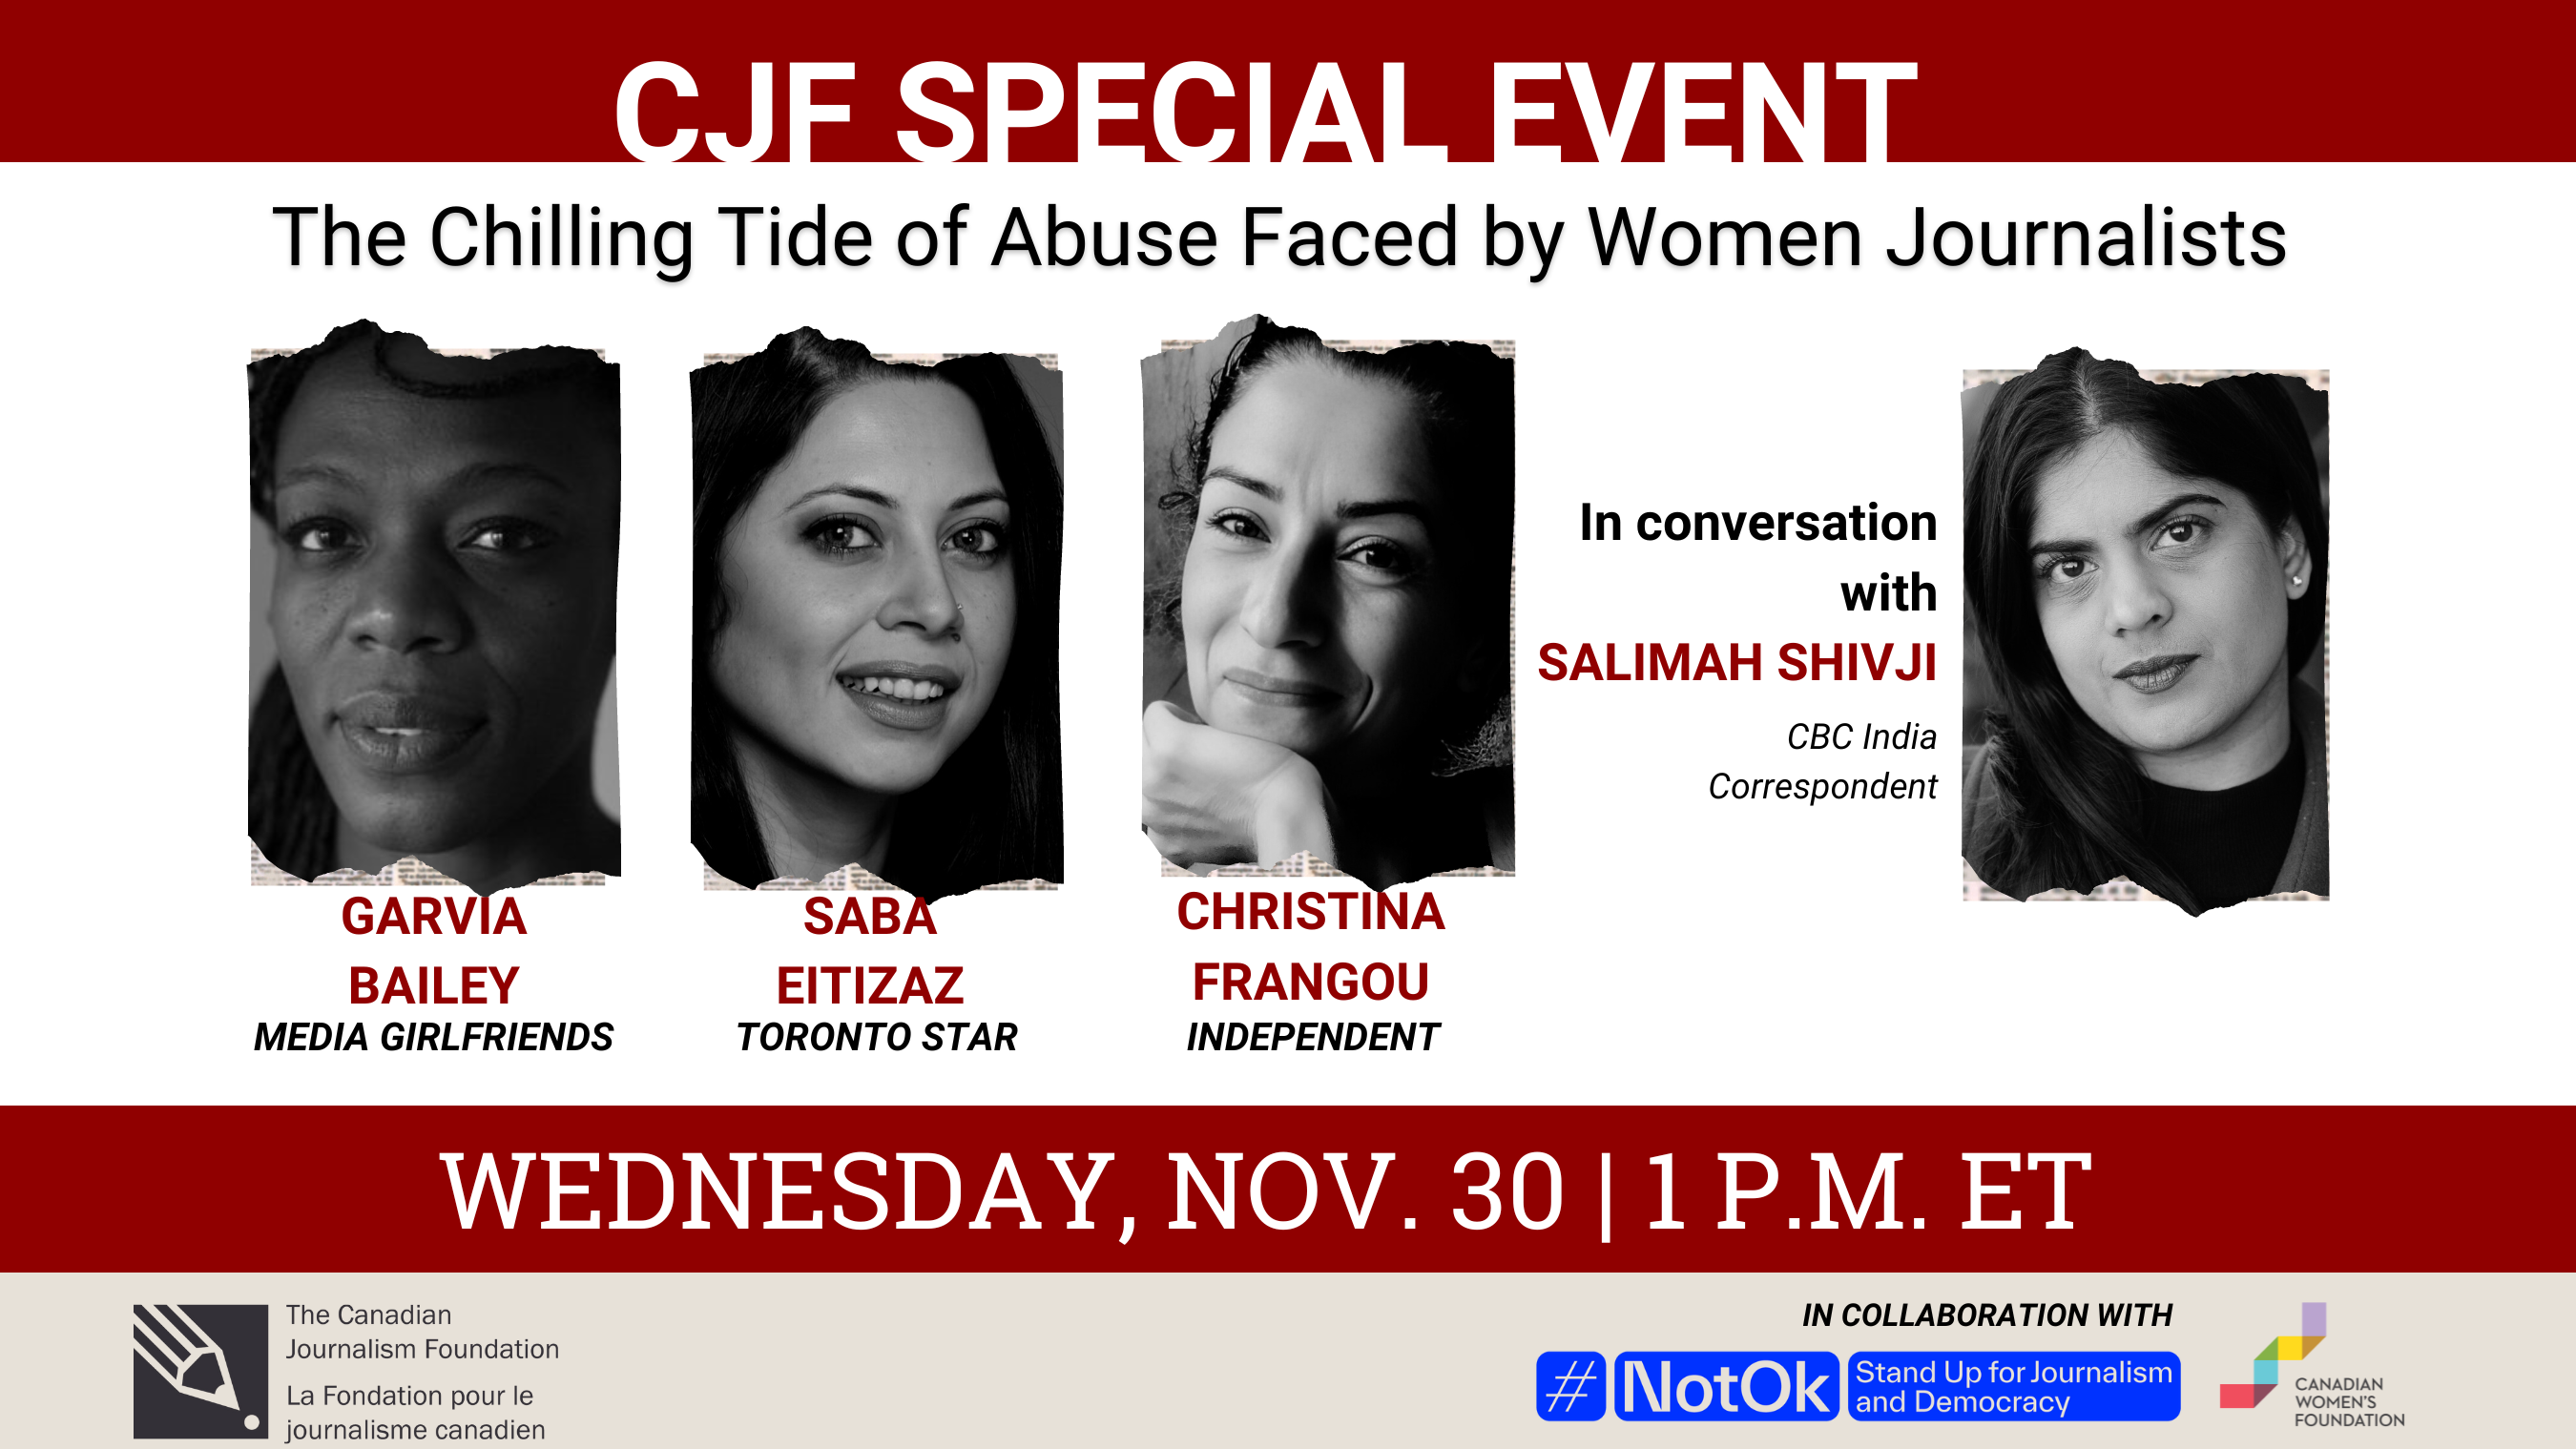 CJF Special Event: The Chilling Tide of Abuse Faced by Women Journalists. Photos of Garvia Bailey (Media Girlfriends), Saba Eitizaz (Toronto Star), Christina Frangou (Independent), Salimah Shivji (CBC India Correspondent). Wednesday Nov. 30 1 p.m. ET. The Canadian Journalism Foundation